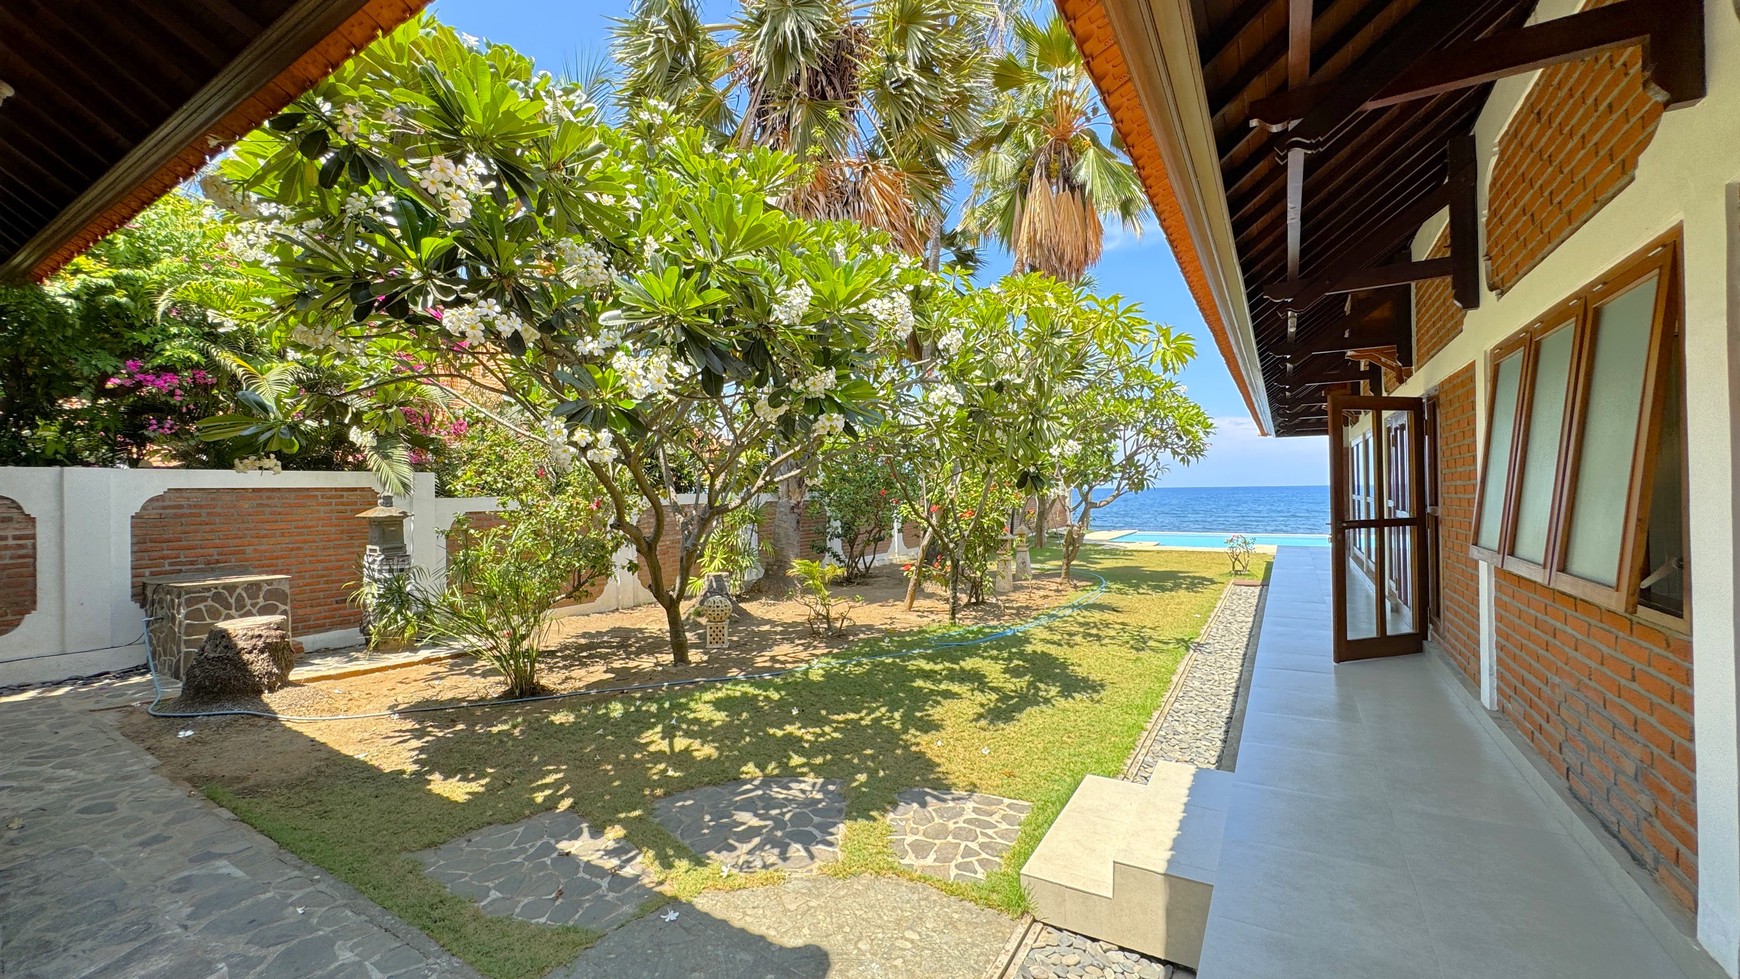 Beautiful Villa In The North East Cost Of Bali